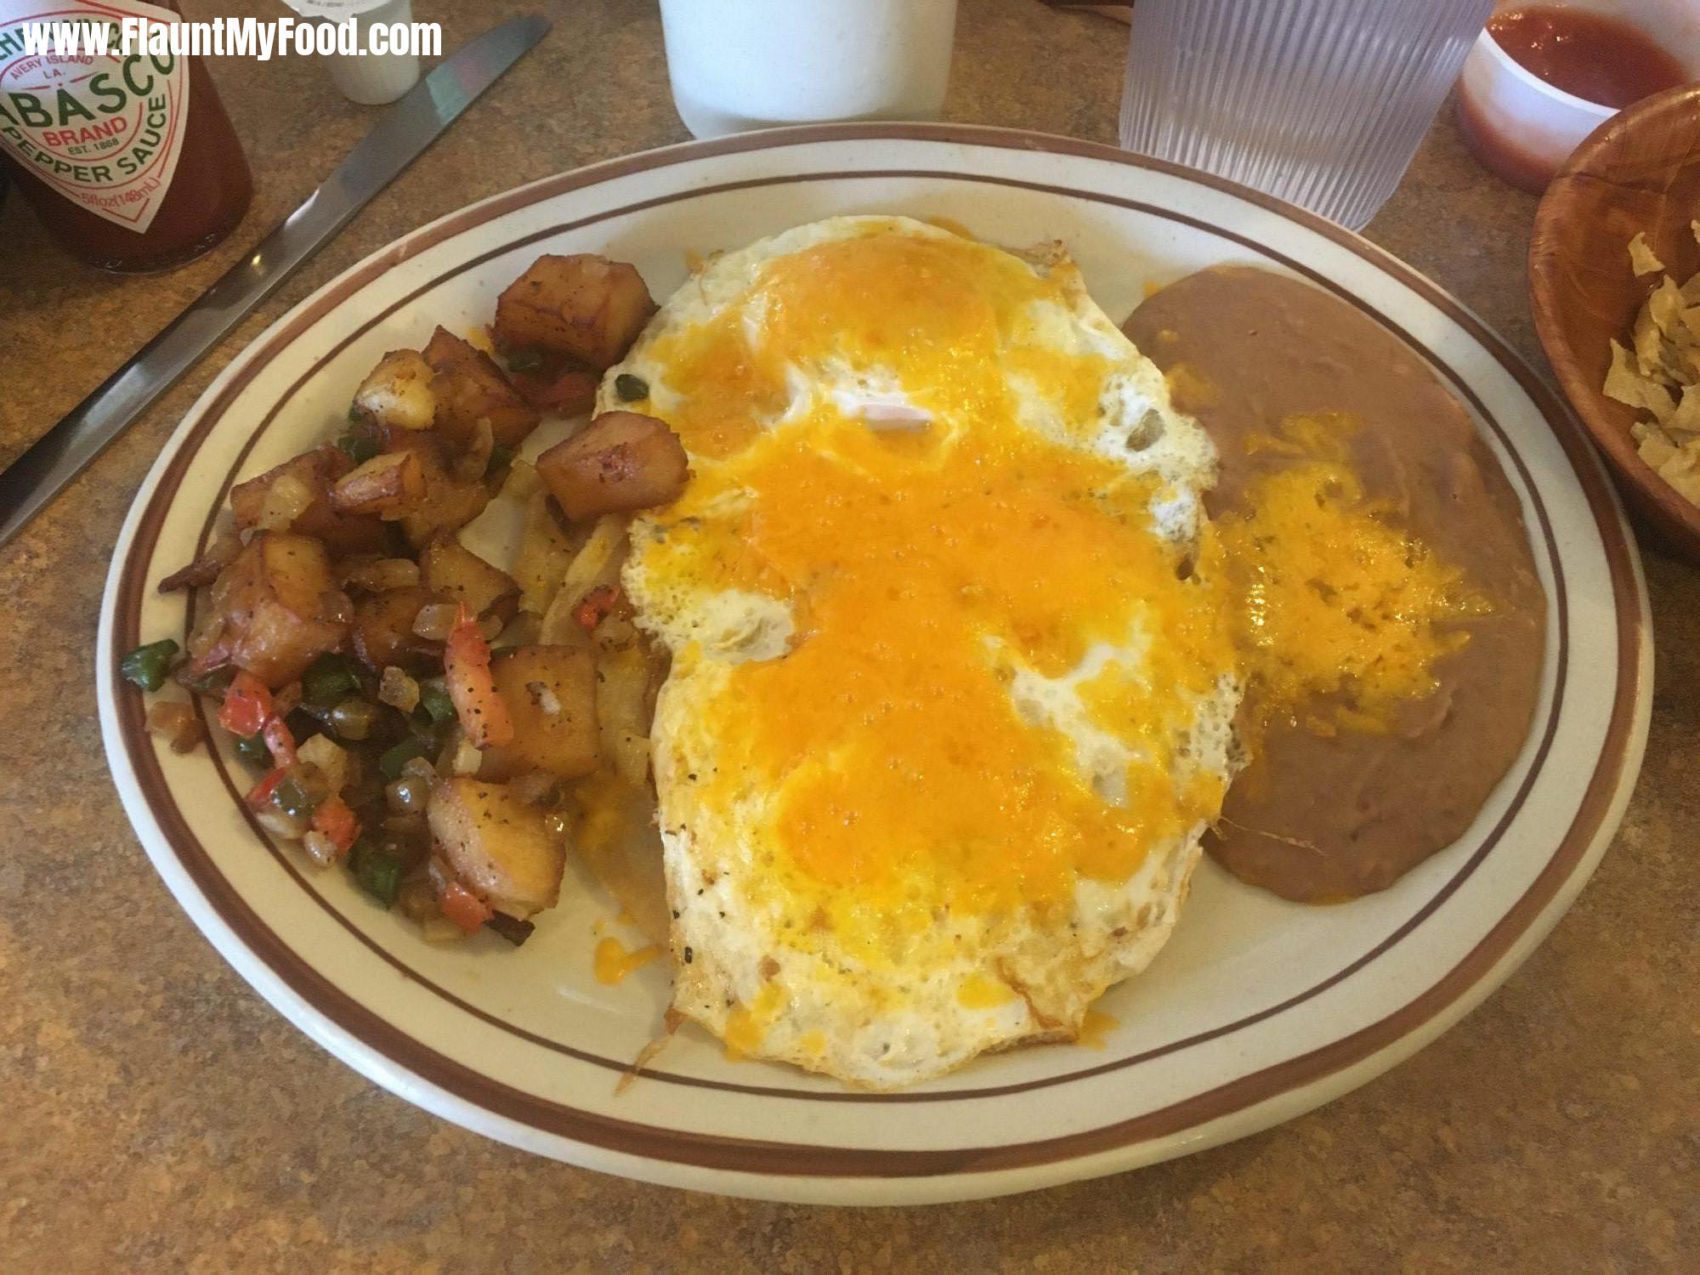 Eggs Potatoes and Veggies New Mexican Breakfast!